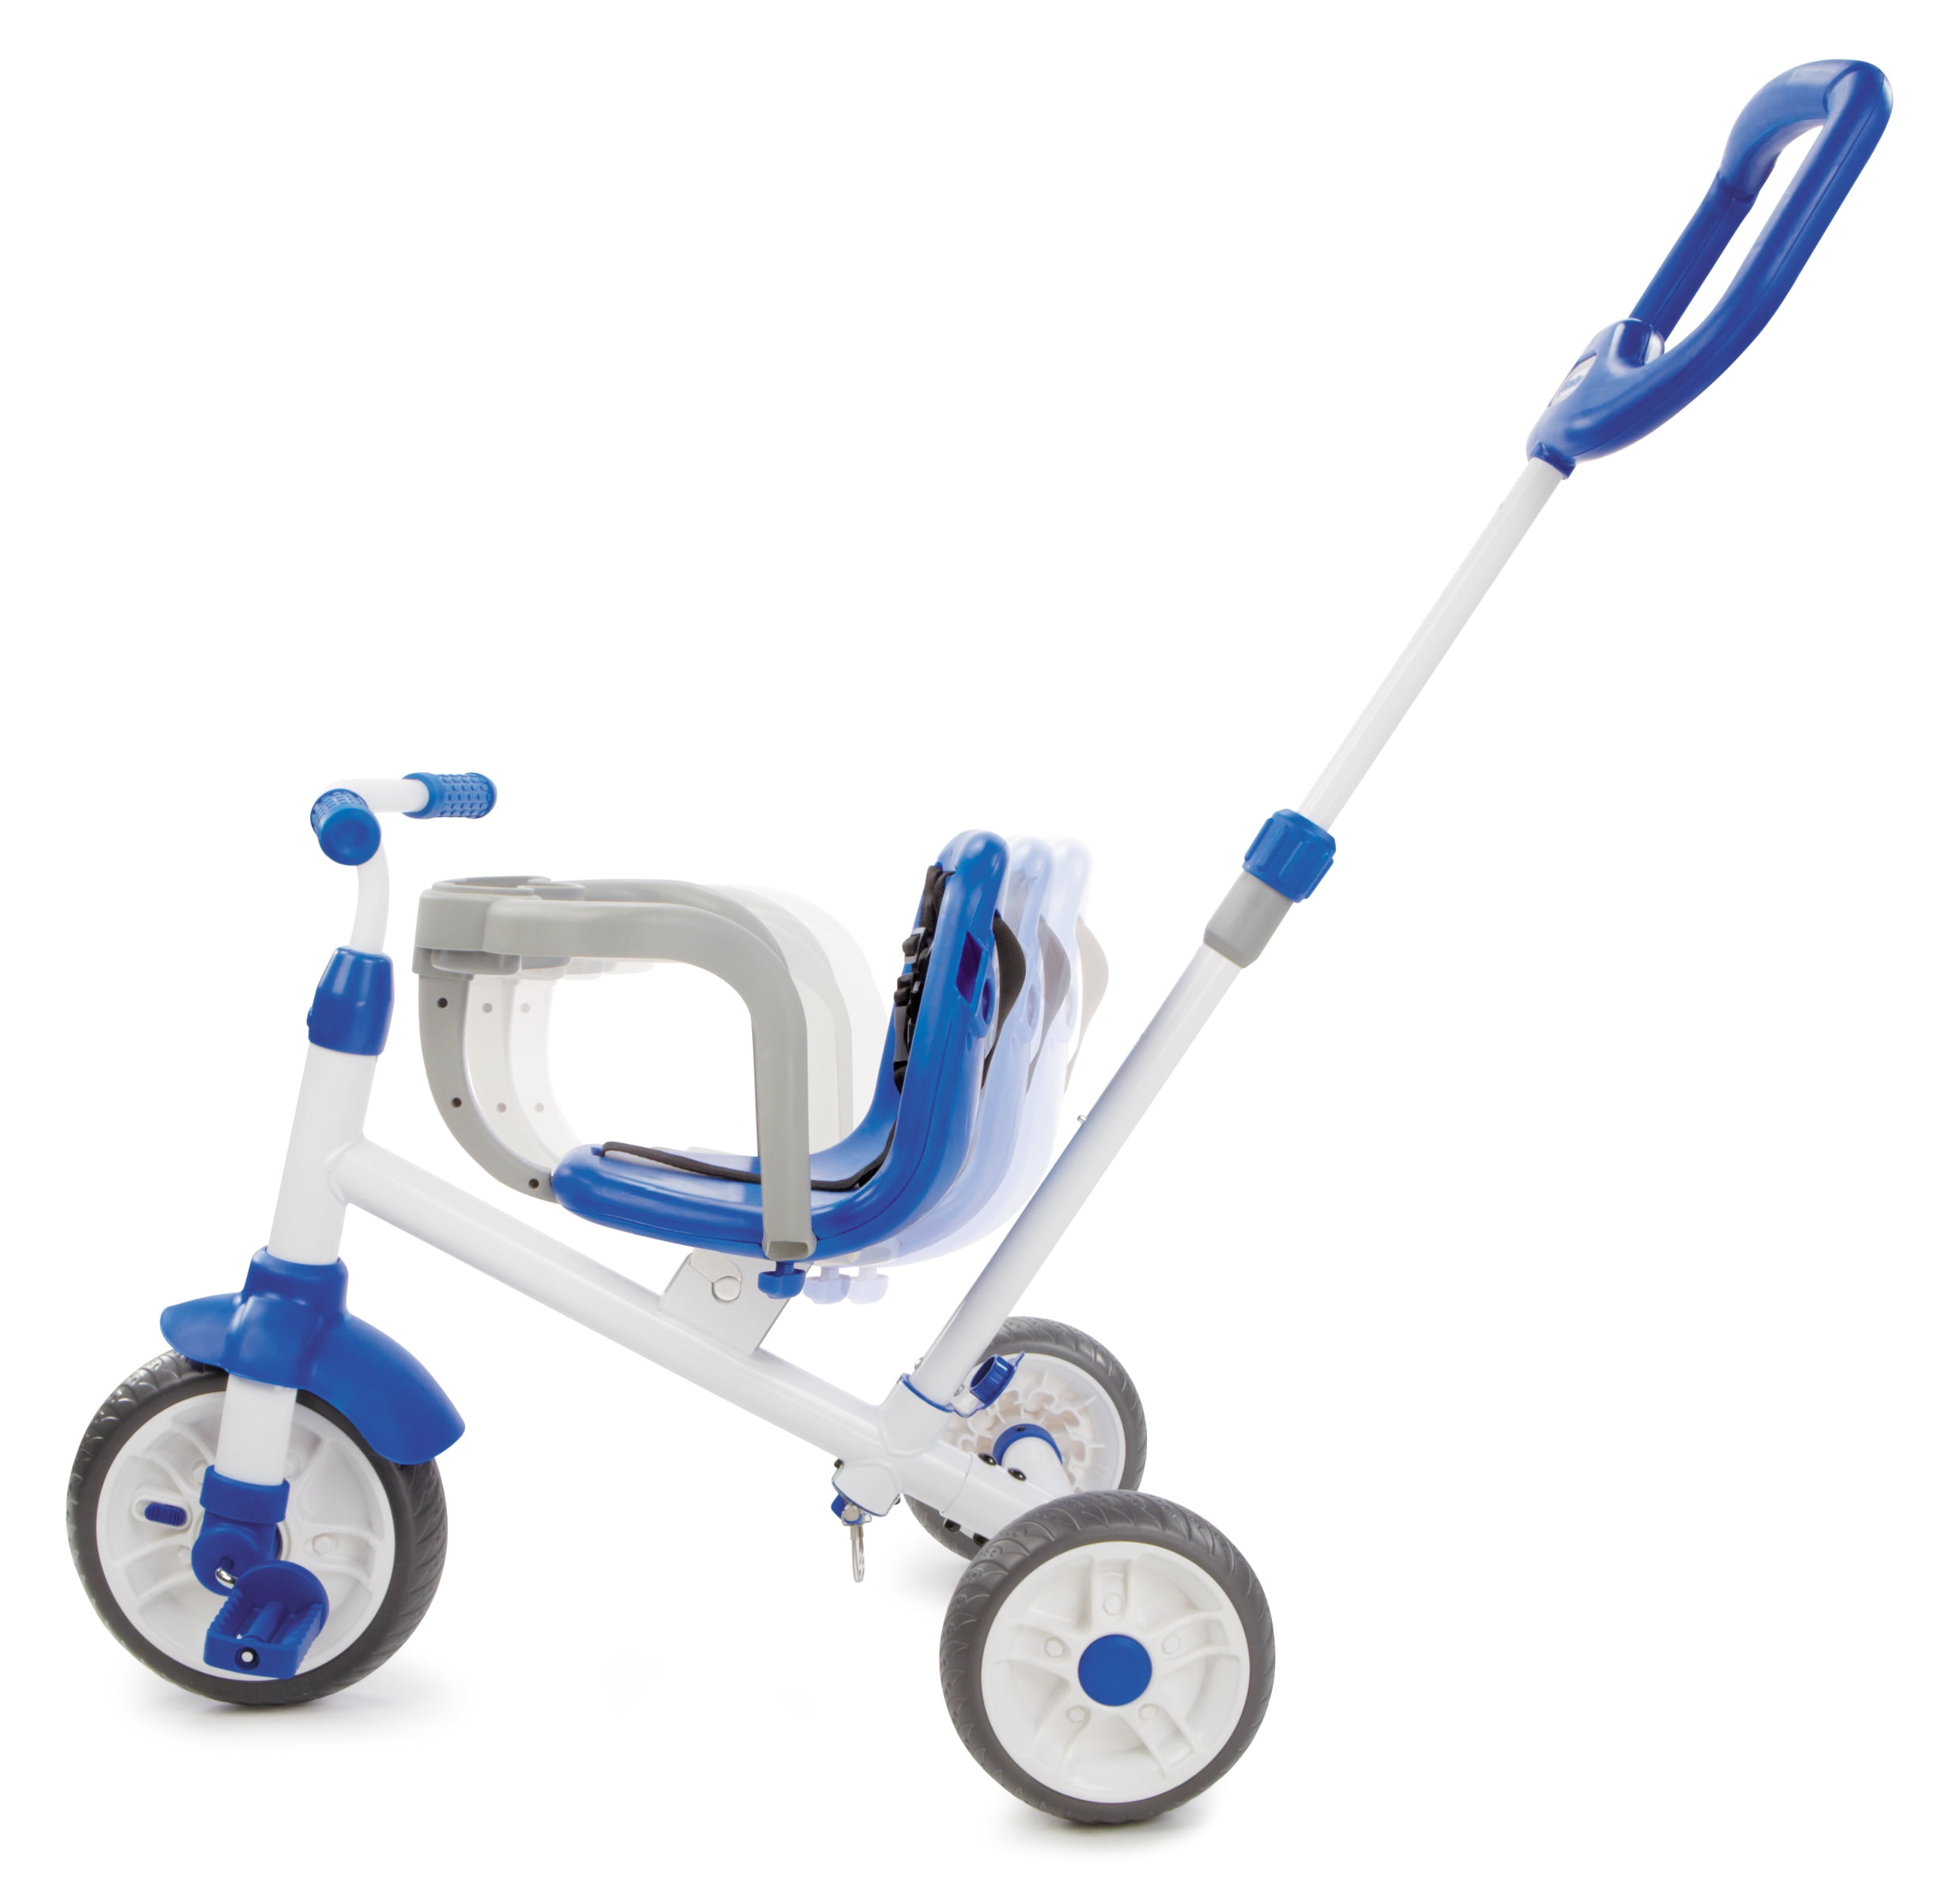 Little Tikes Ride 'N Learn 3-in-1 Trike in Blue, Convertible Tricycle for  Toddlers with 3 Stages of Growth - For Kids Boys Girls 9 Months to 3 Years  Old